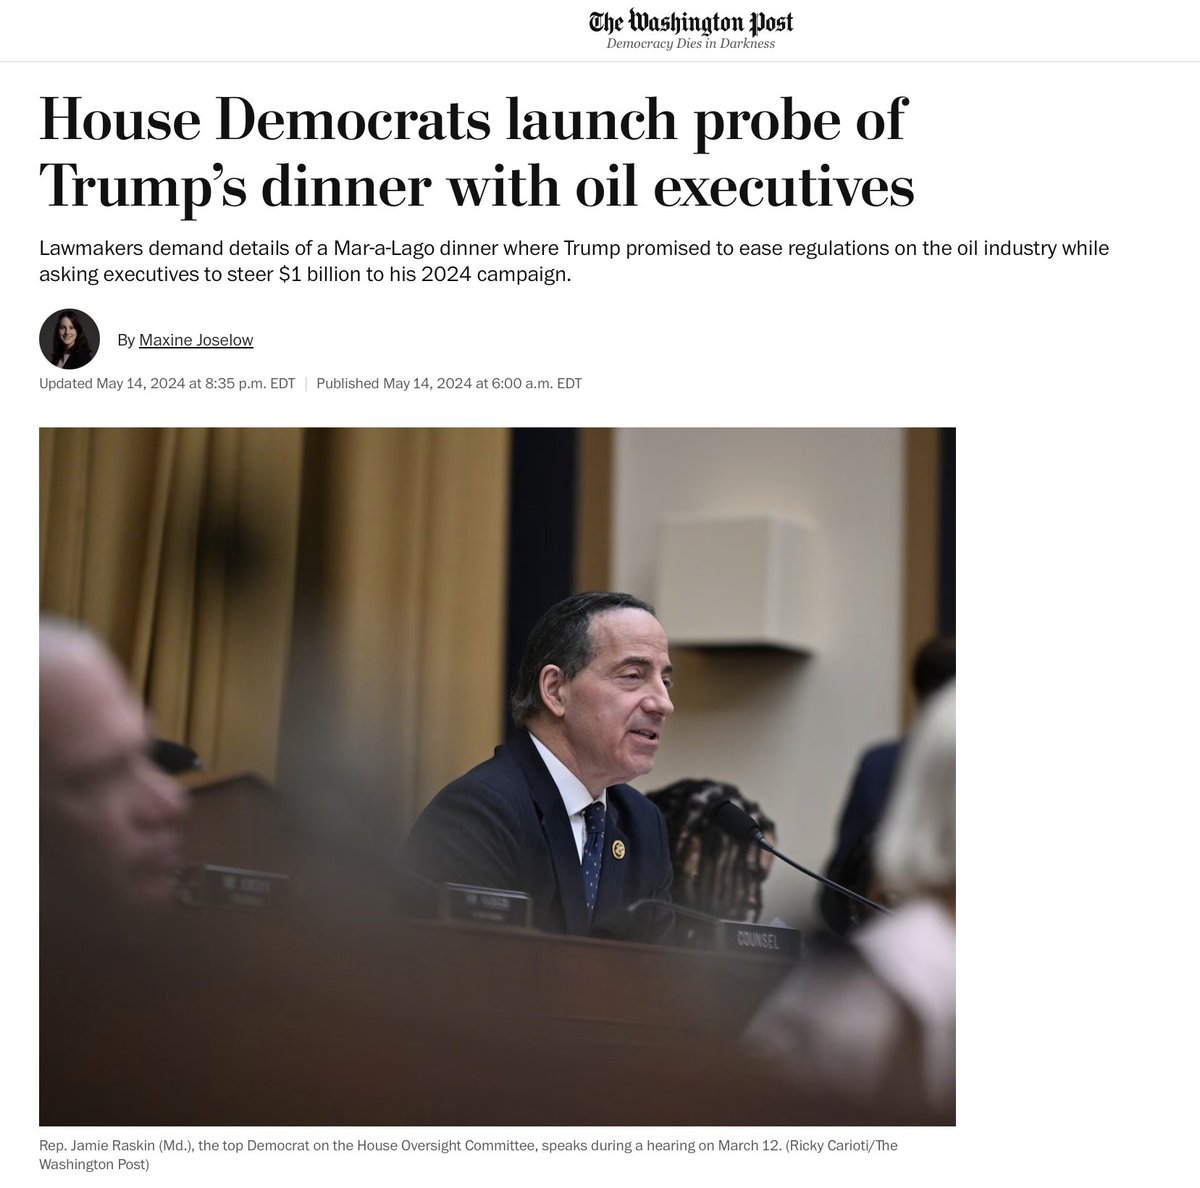 More election interference from House Democrats who are now trying to criminalize Big Oil's support for @realDonaldTrump: Rep. Jamie Raskin (Md.), the top Democrat on the House Oversight Committee, asked the executives to provide the names and titles of any company